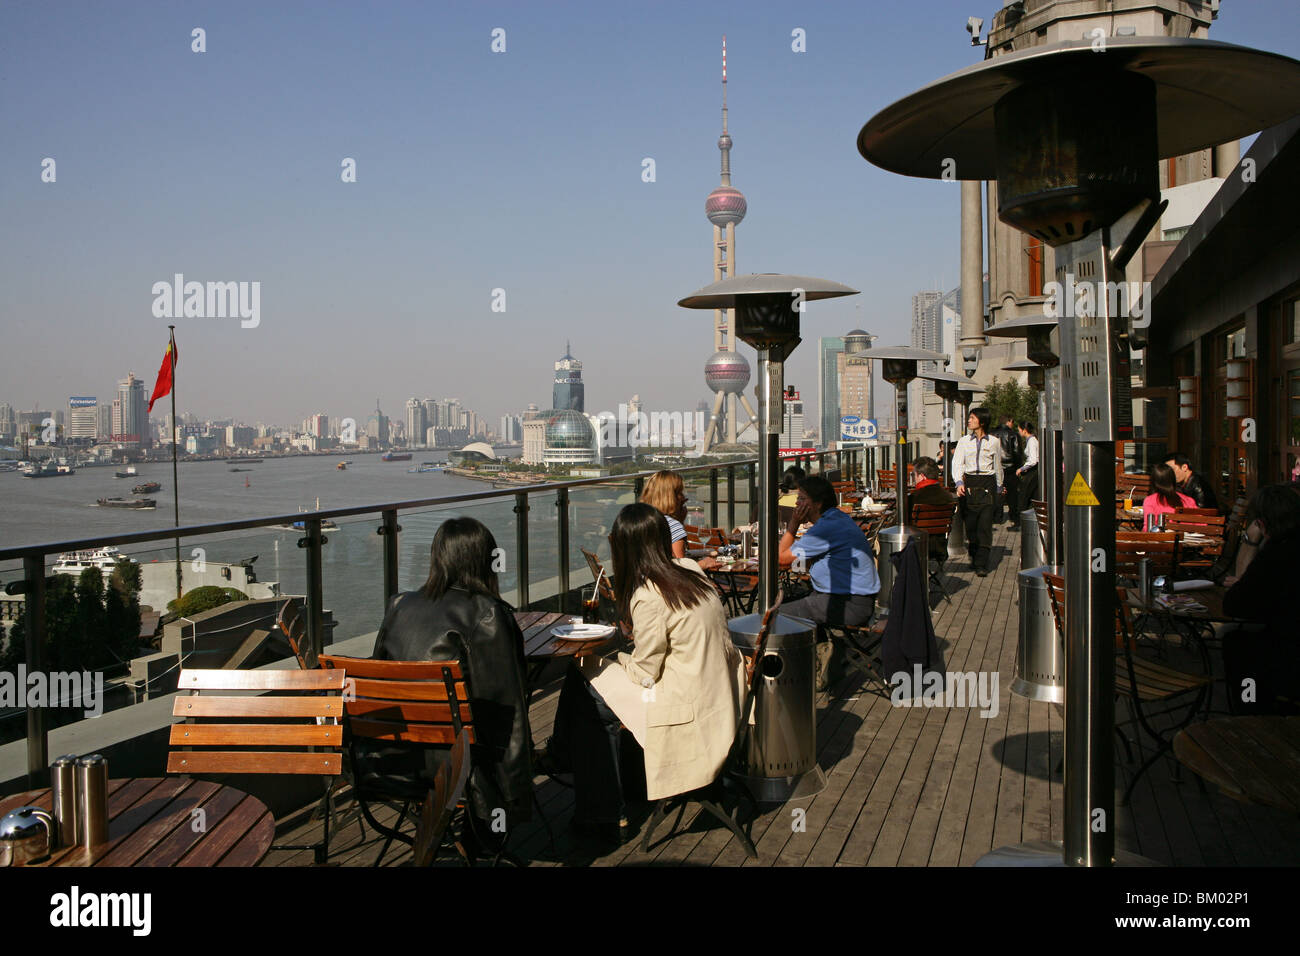 Three on the Bund, Roof terrace, view of The Bund, Pudong, New Heights Stock Photo